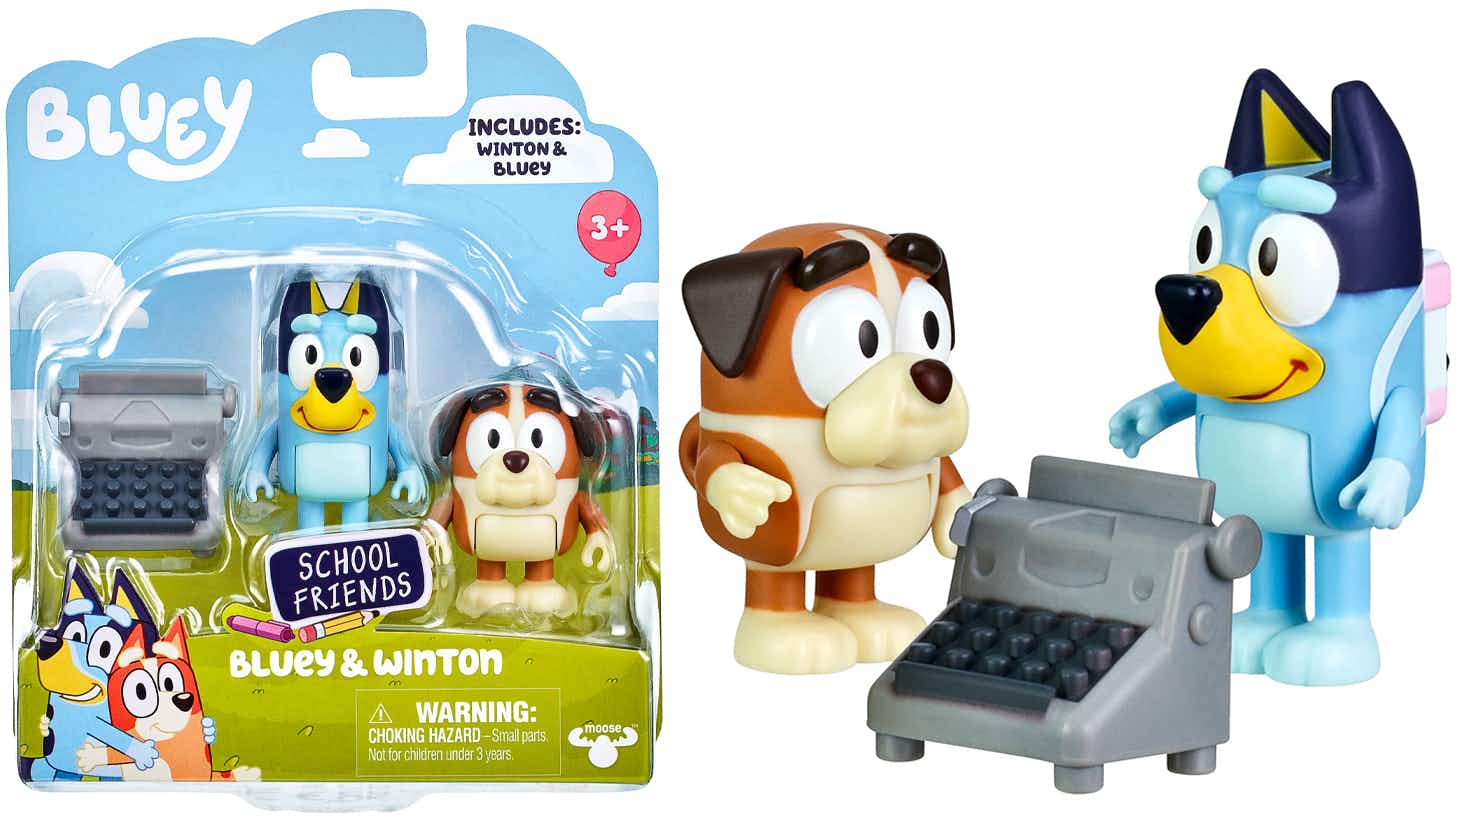 A School Friends Winton & Bluey 2-Pack Figures with Accessories set on a white background.